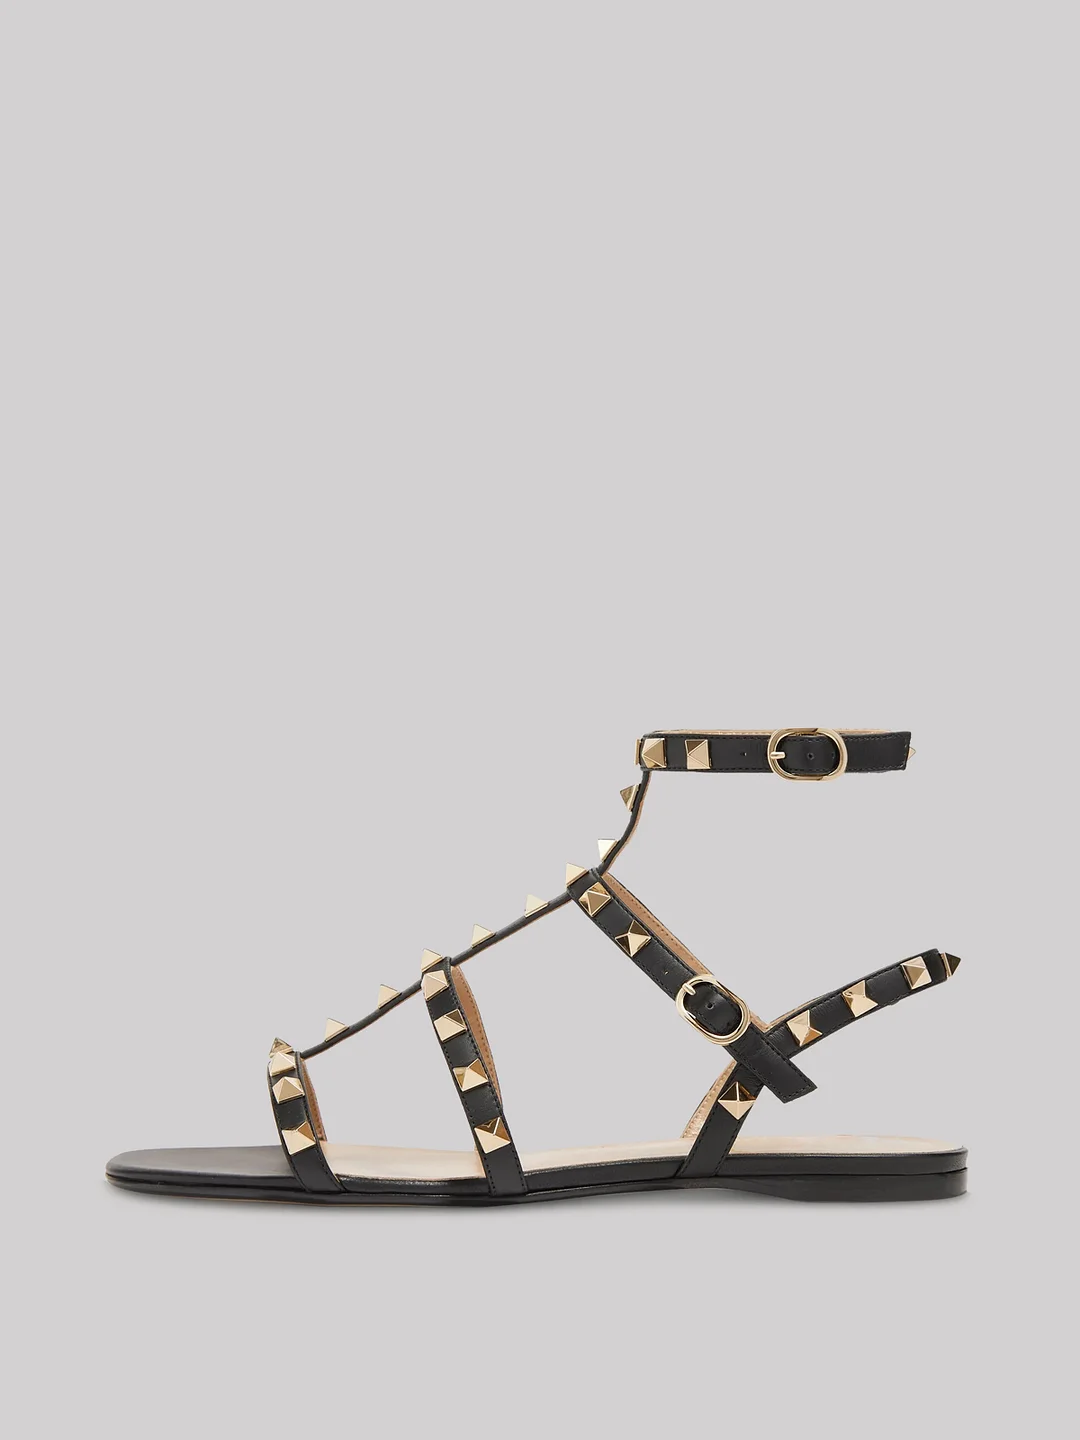 Women's Flats Sandals Classic Rockstud with Straps Slipper Summer Shoes